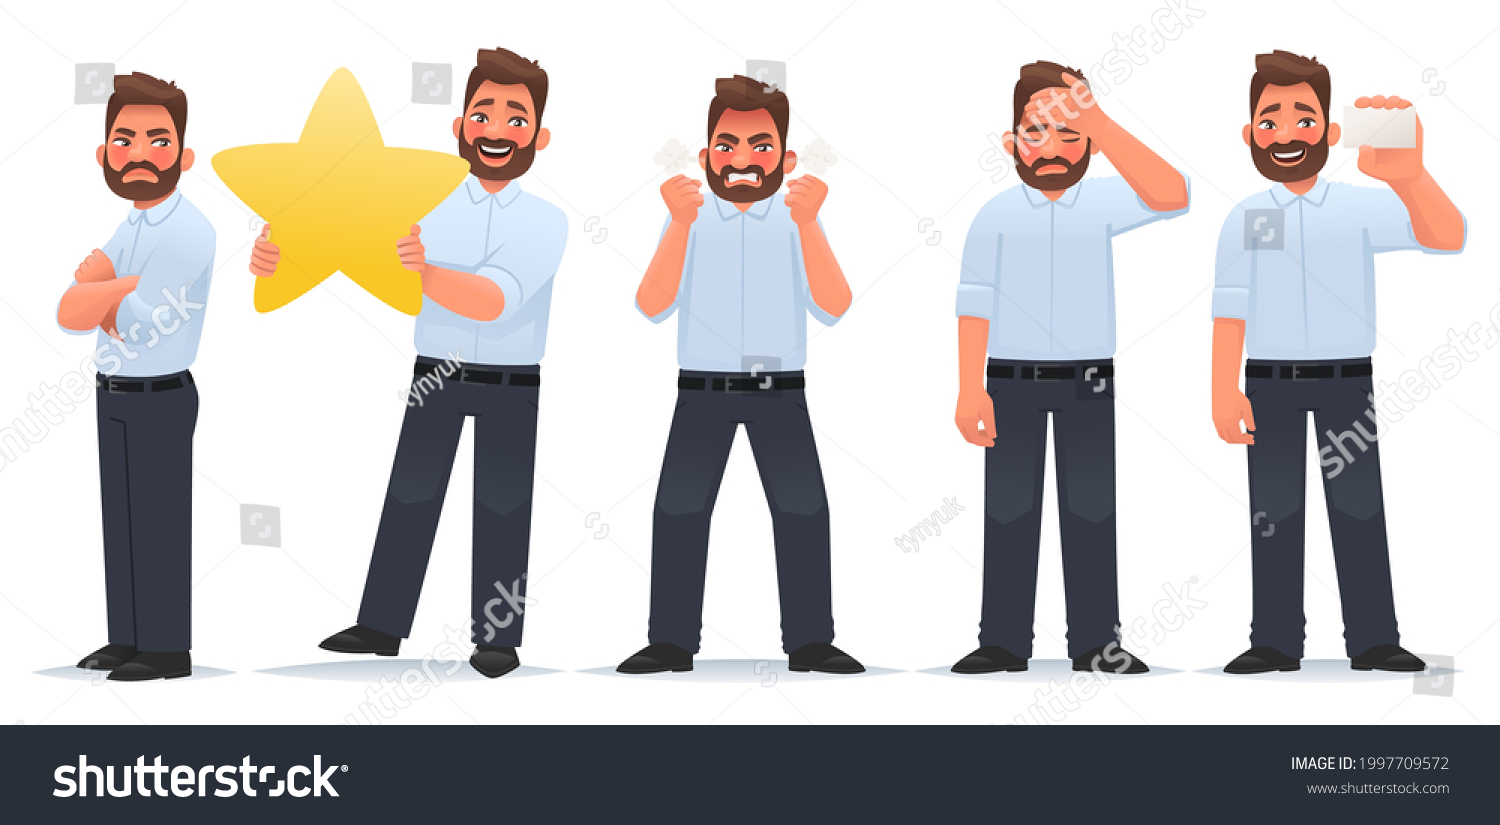 SVG of Set of character man. A businessman with a feeling of envy, with a star and evaluates the work, an angry guy, tired, shows a business card. Vector illustration in cartoon style svg